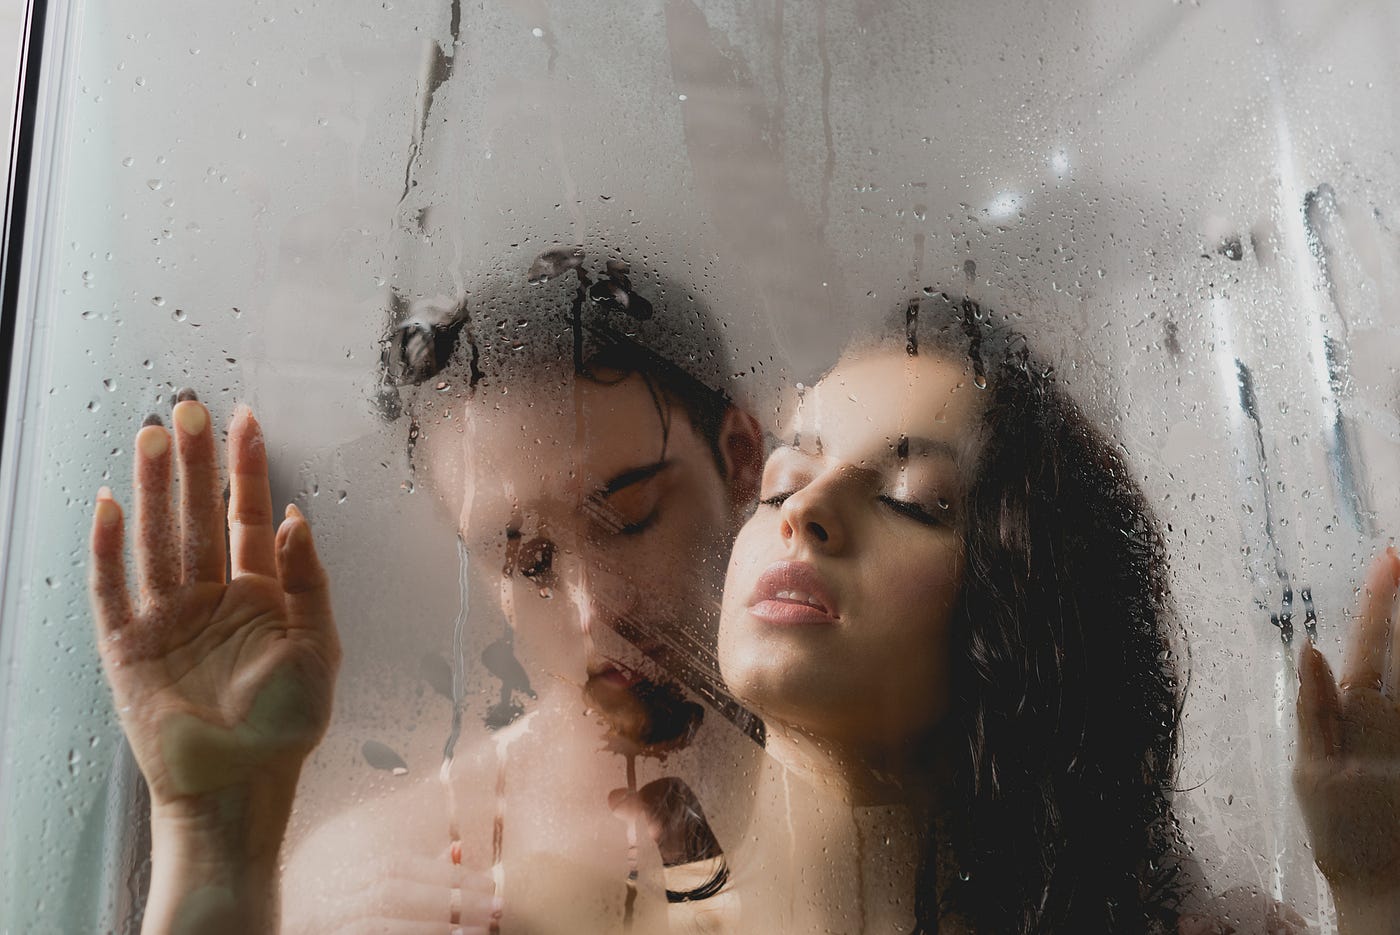 3 Reasons to Try Showering With Your Partner Enjoy this wet path to intimacy Sex…With a Side of Quirk image